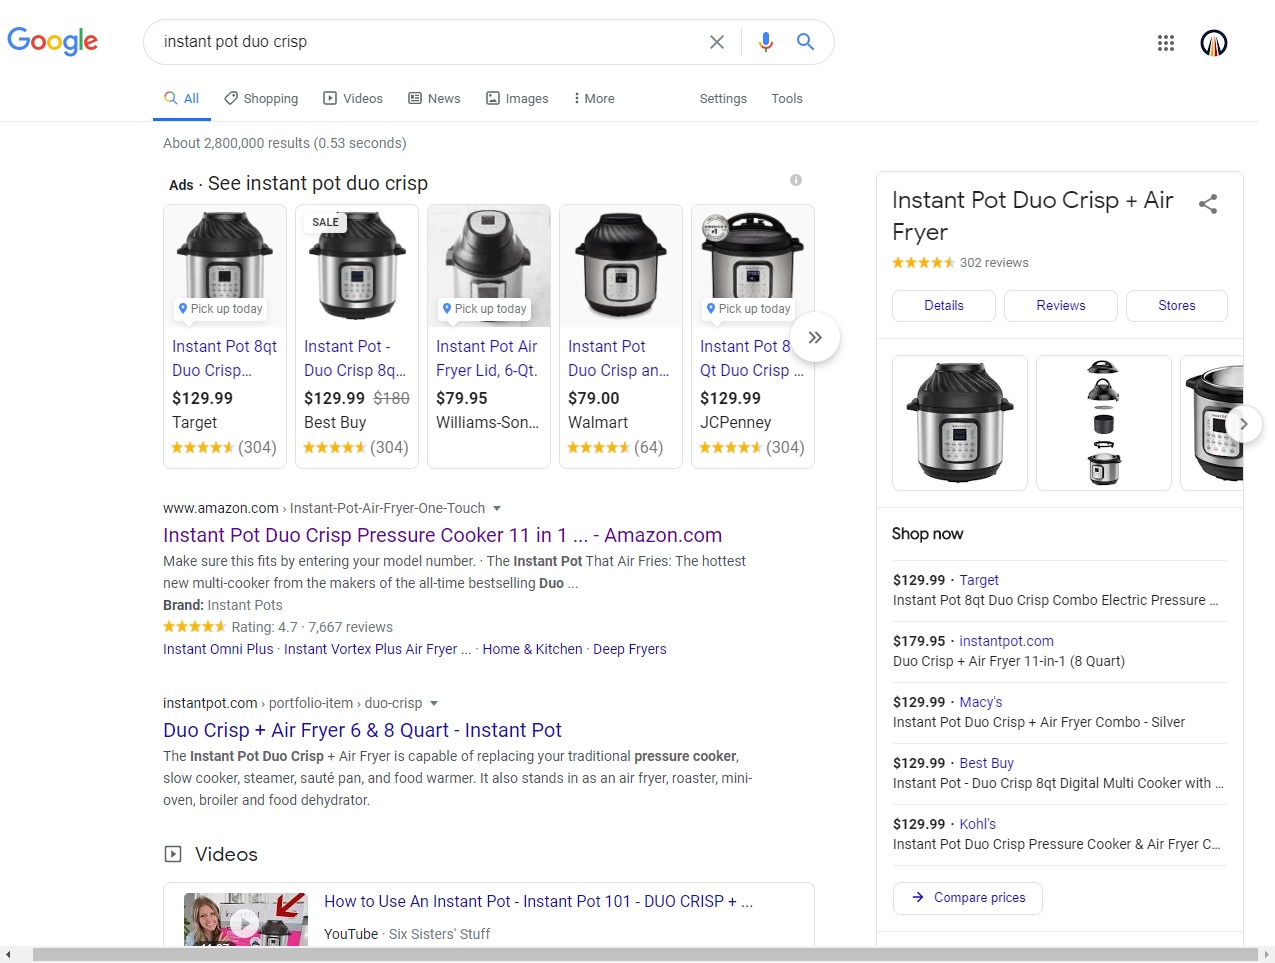 SEO: Google’s Product Knowledge Panels Drive Impressions (but Not for Amazon)